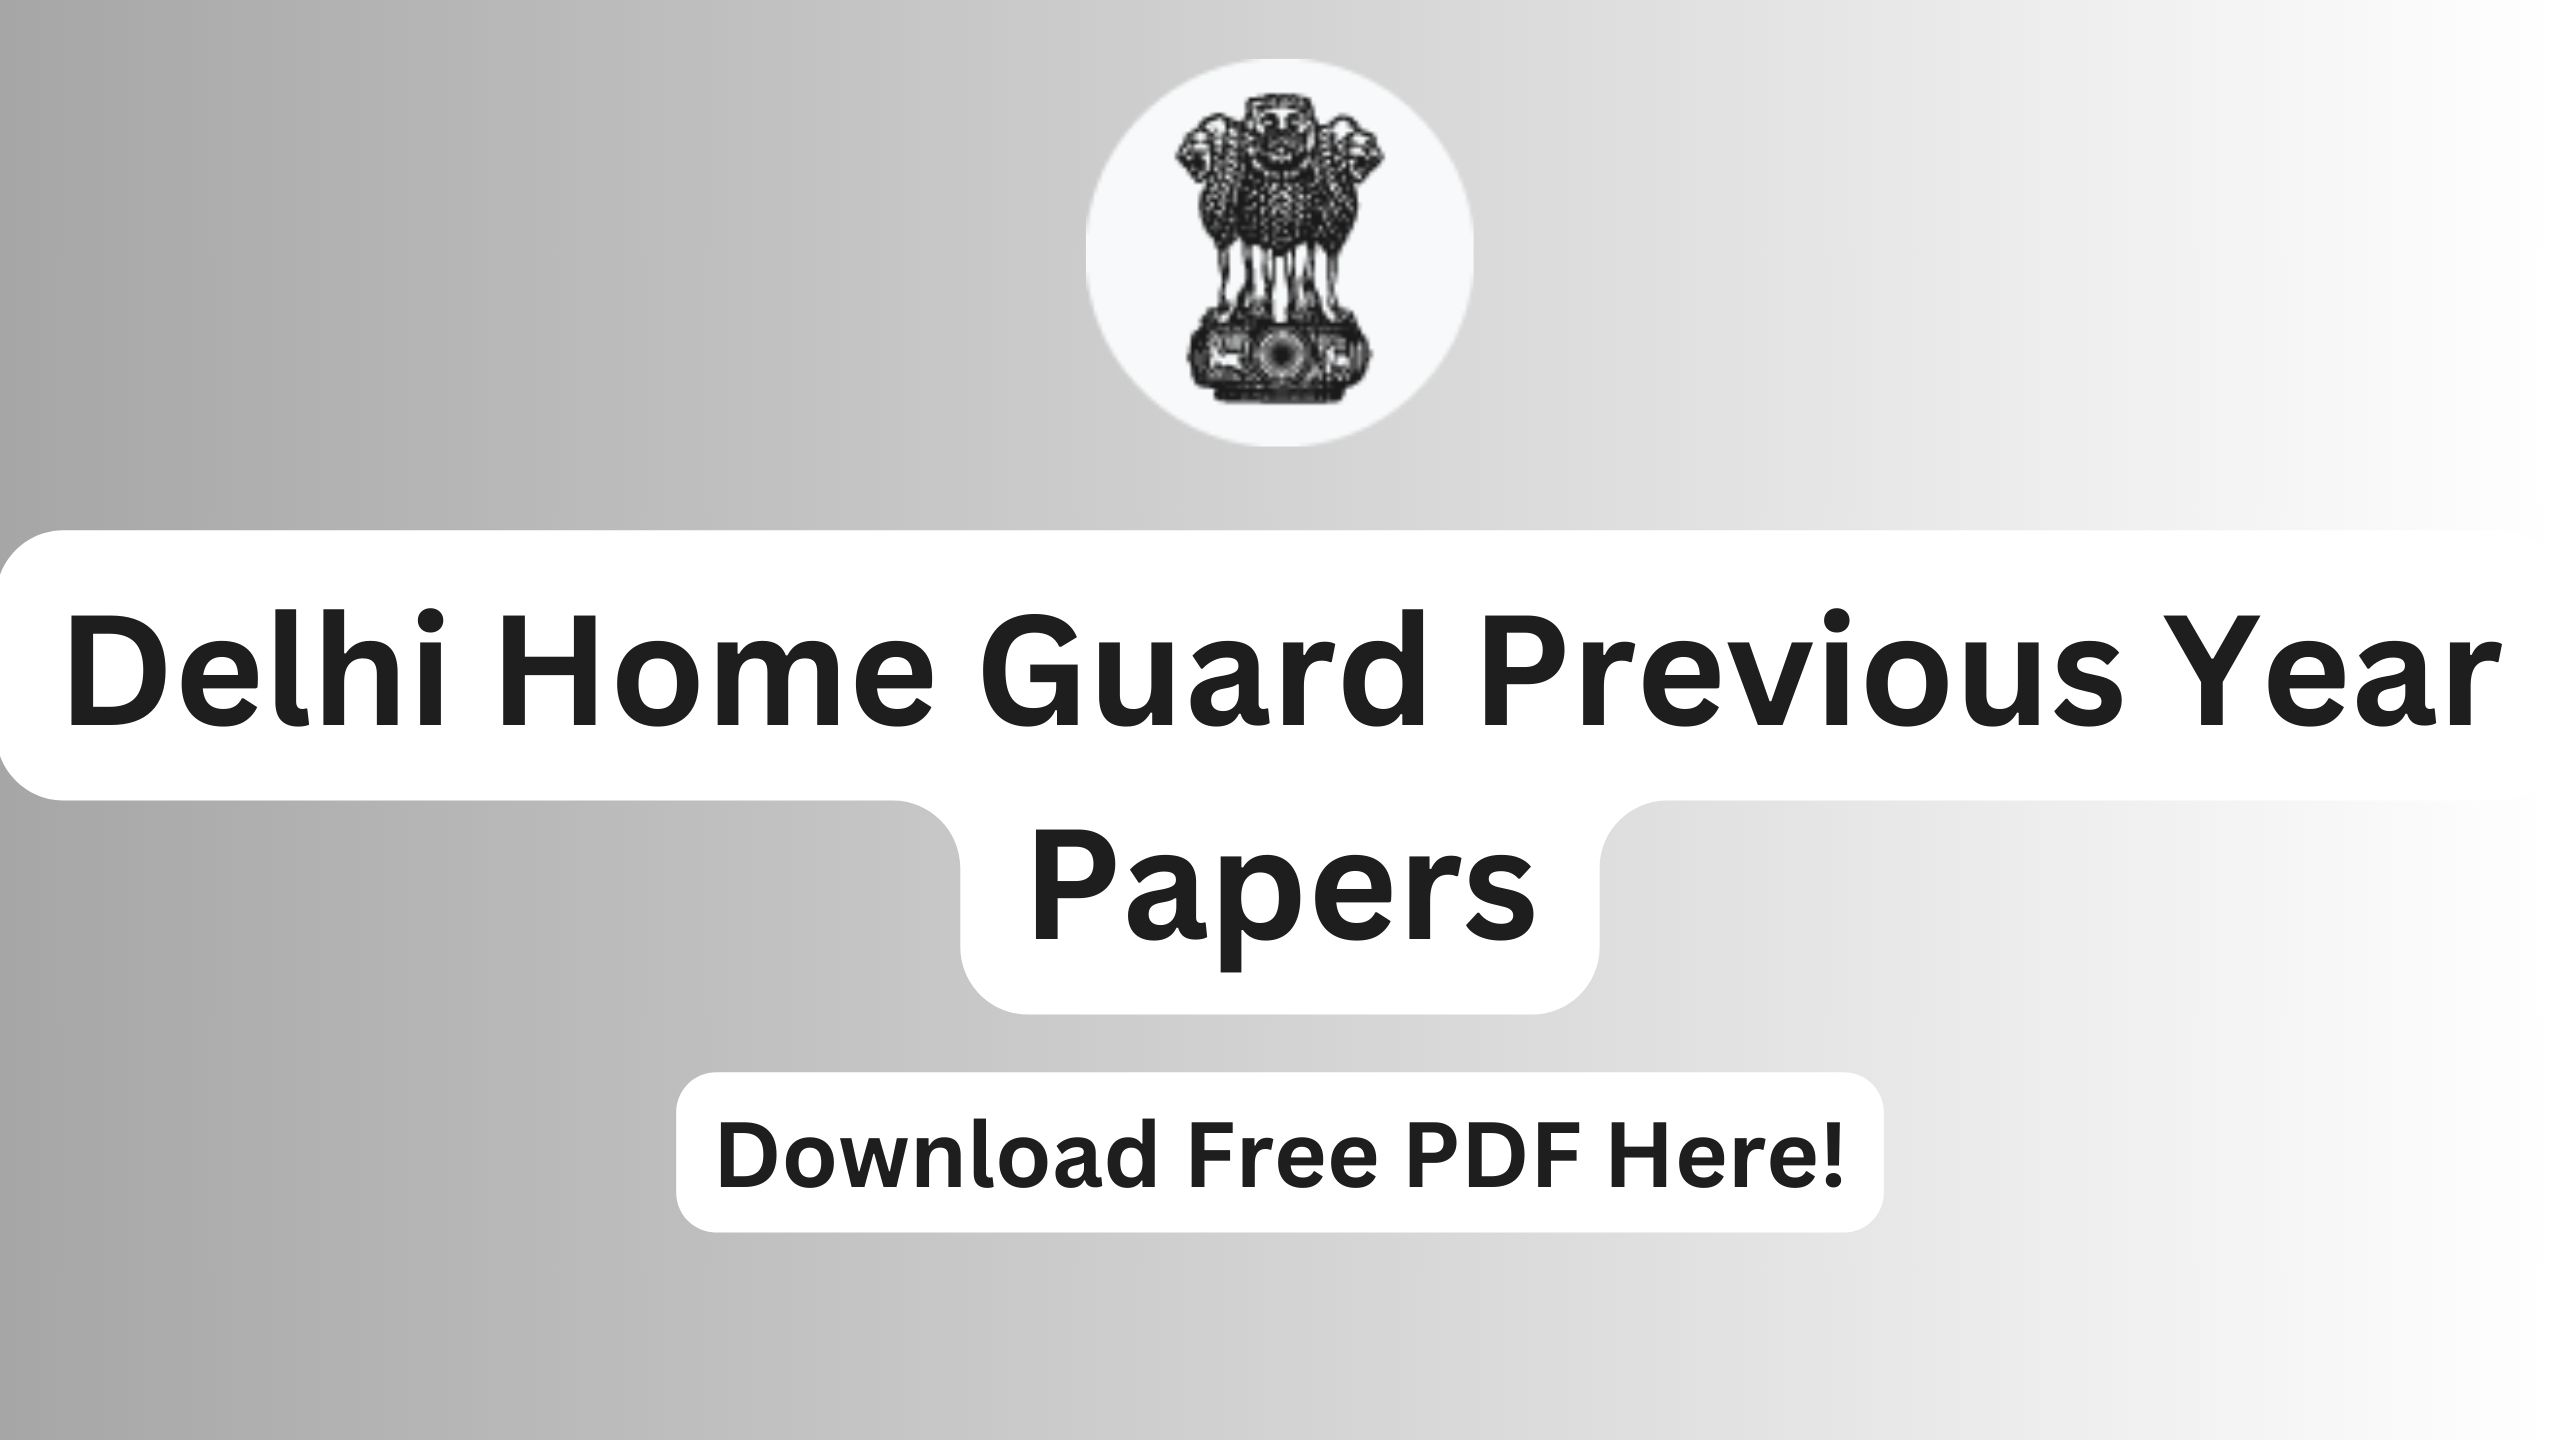 Delhi Home Guard Previous Year Papers